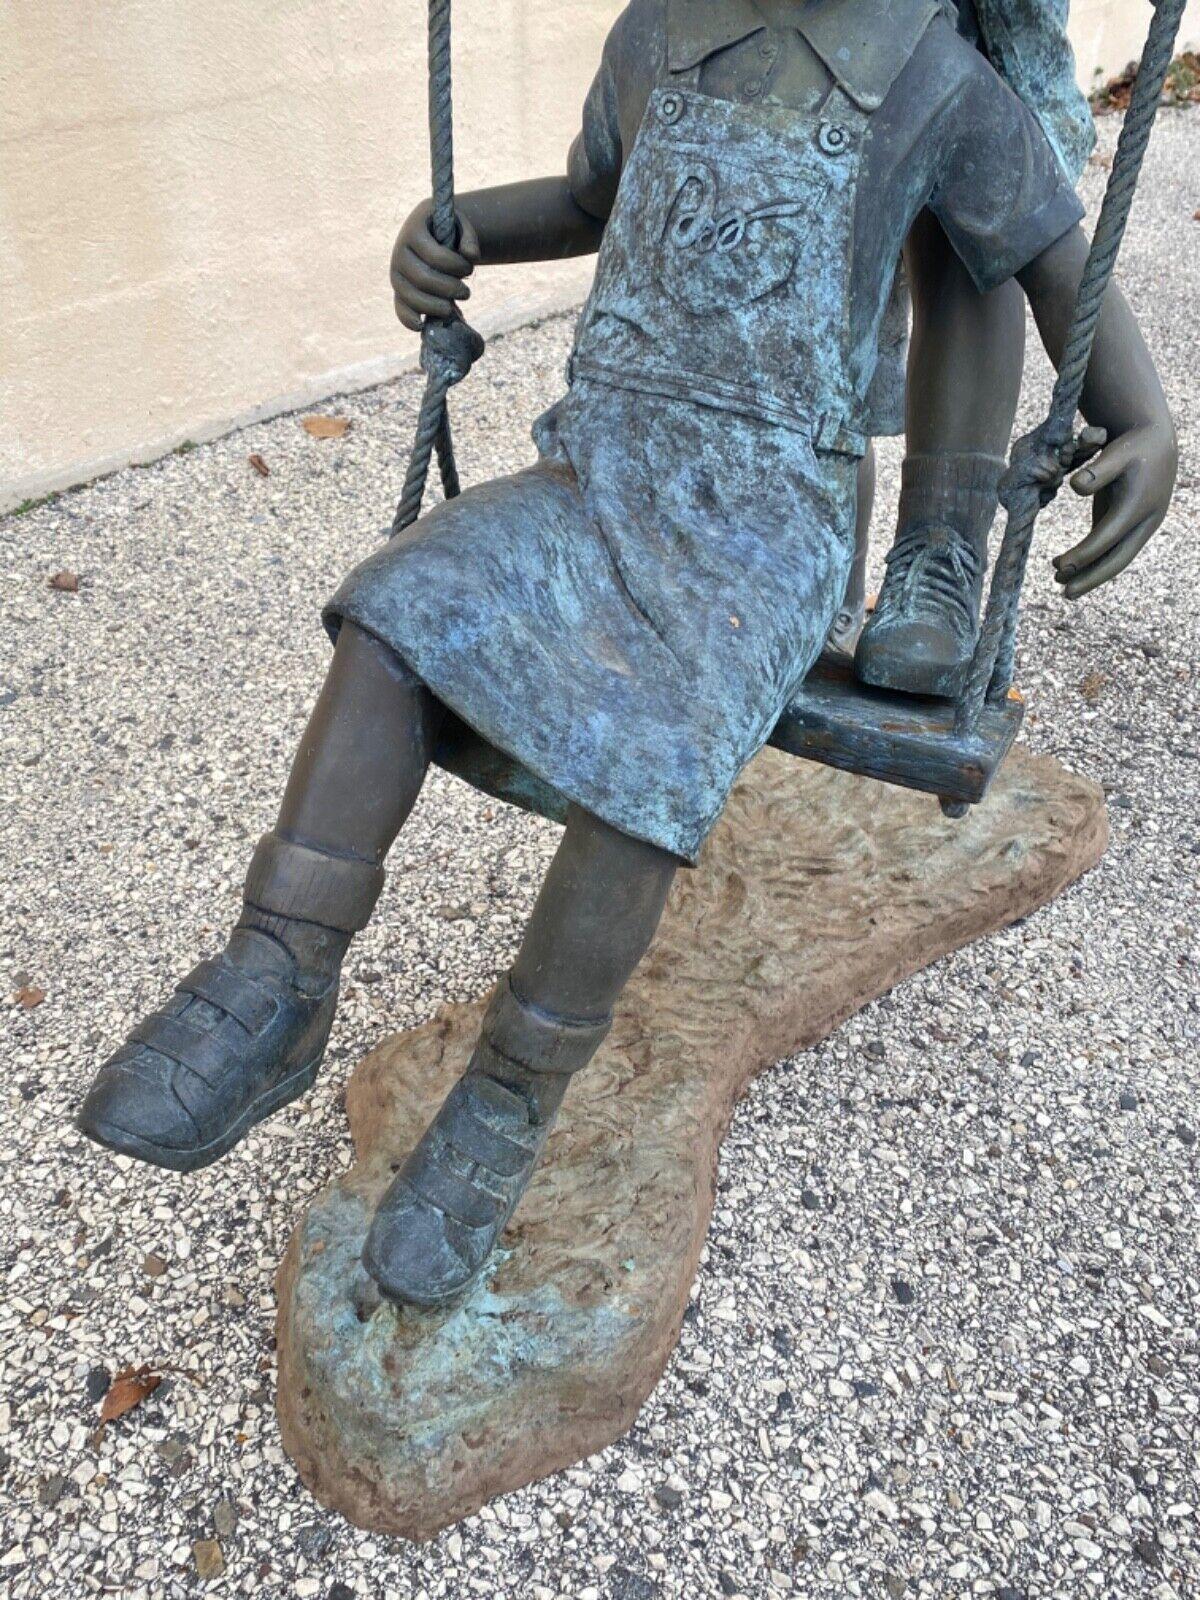 boy and girl on swing garden statue